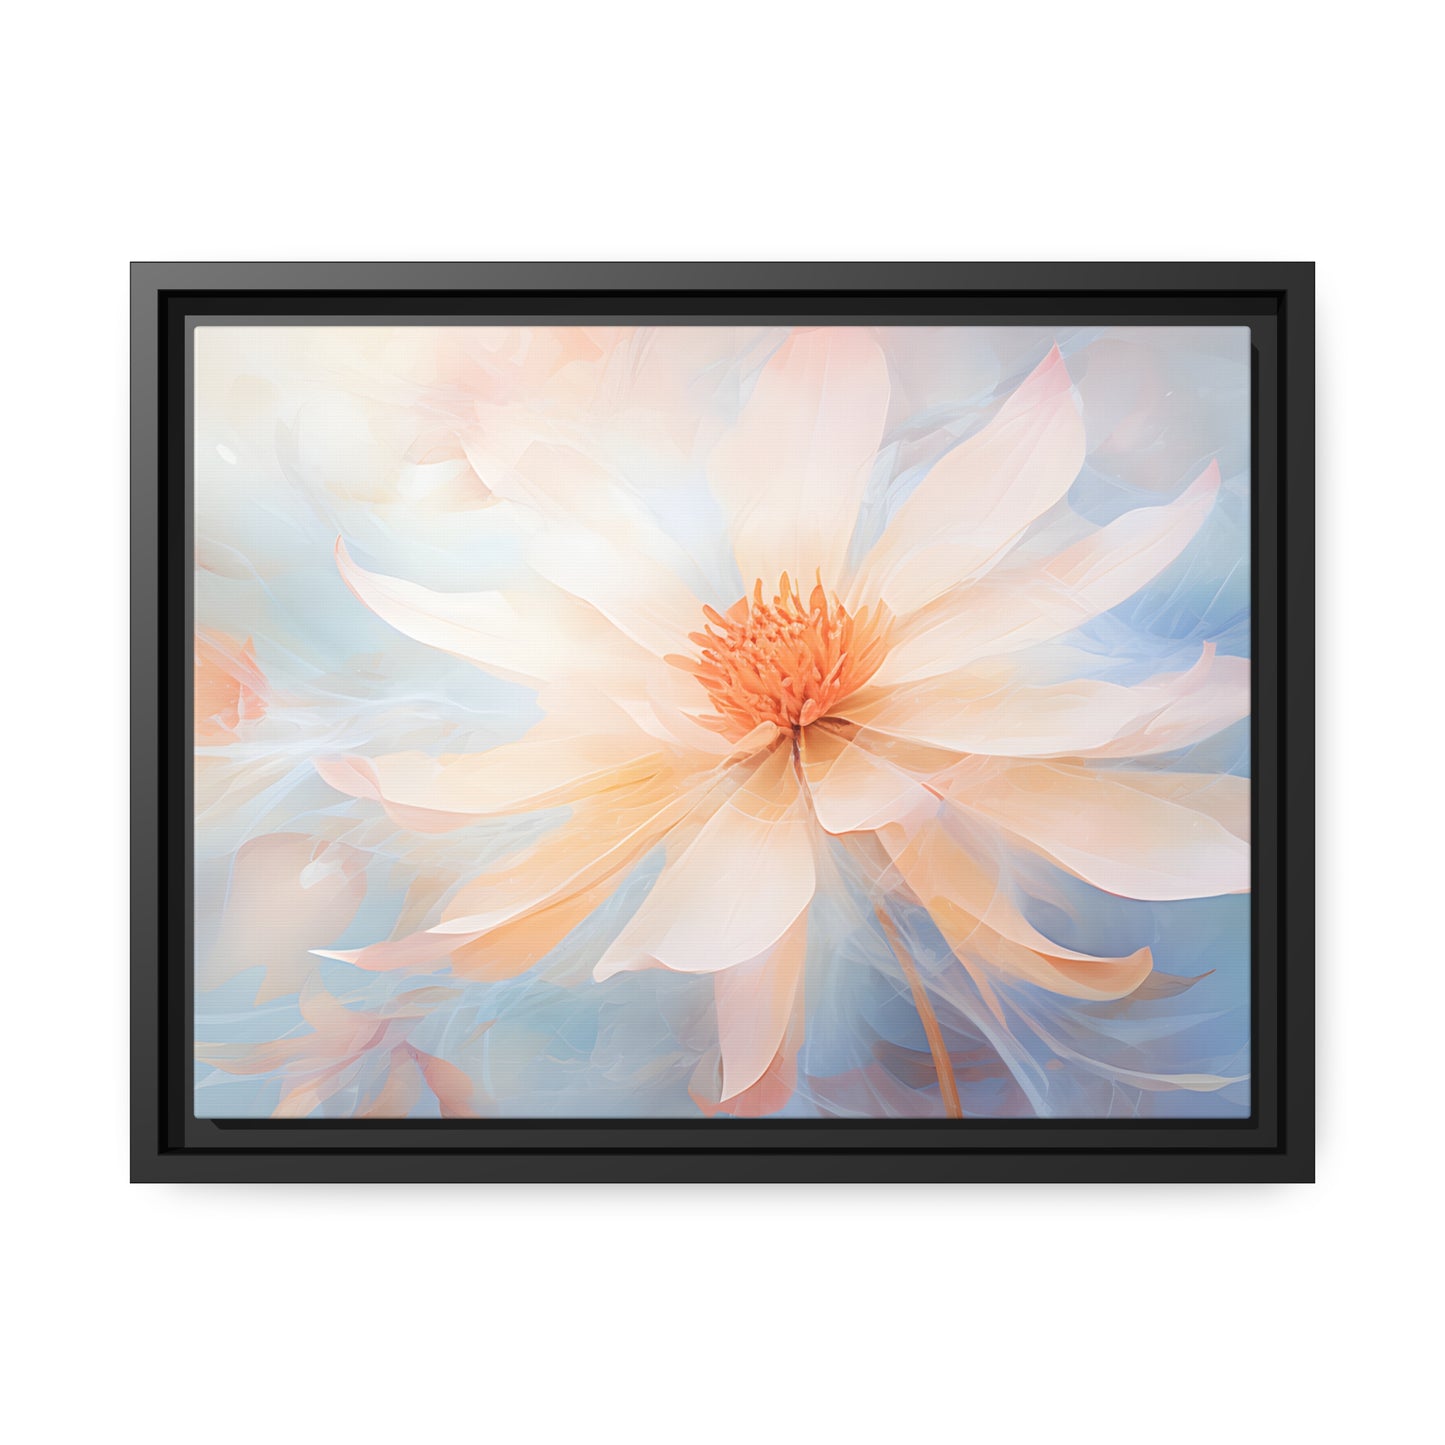 Framed Canvas Watercolor Style Soft Daisy Flower Floating Canvas